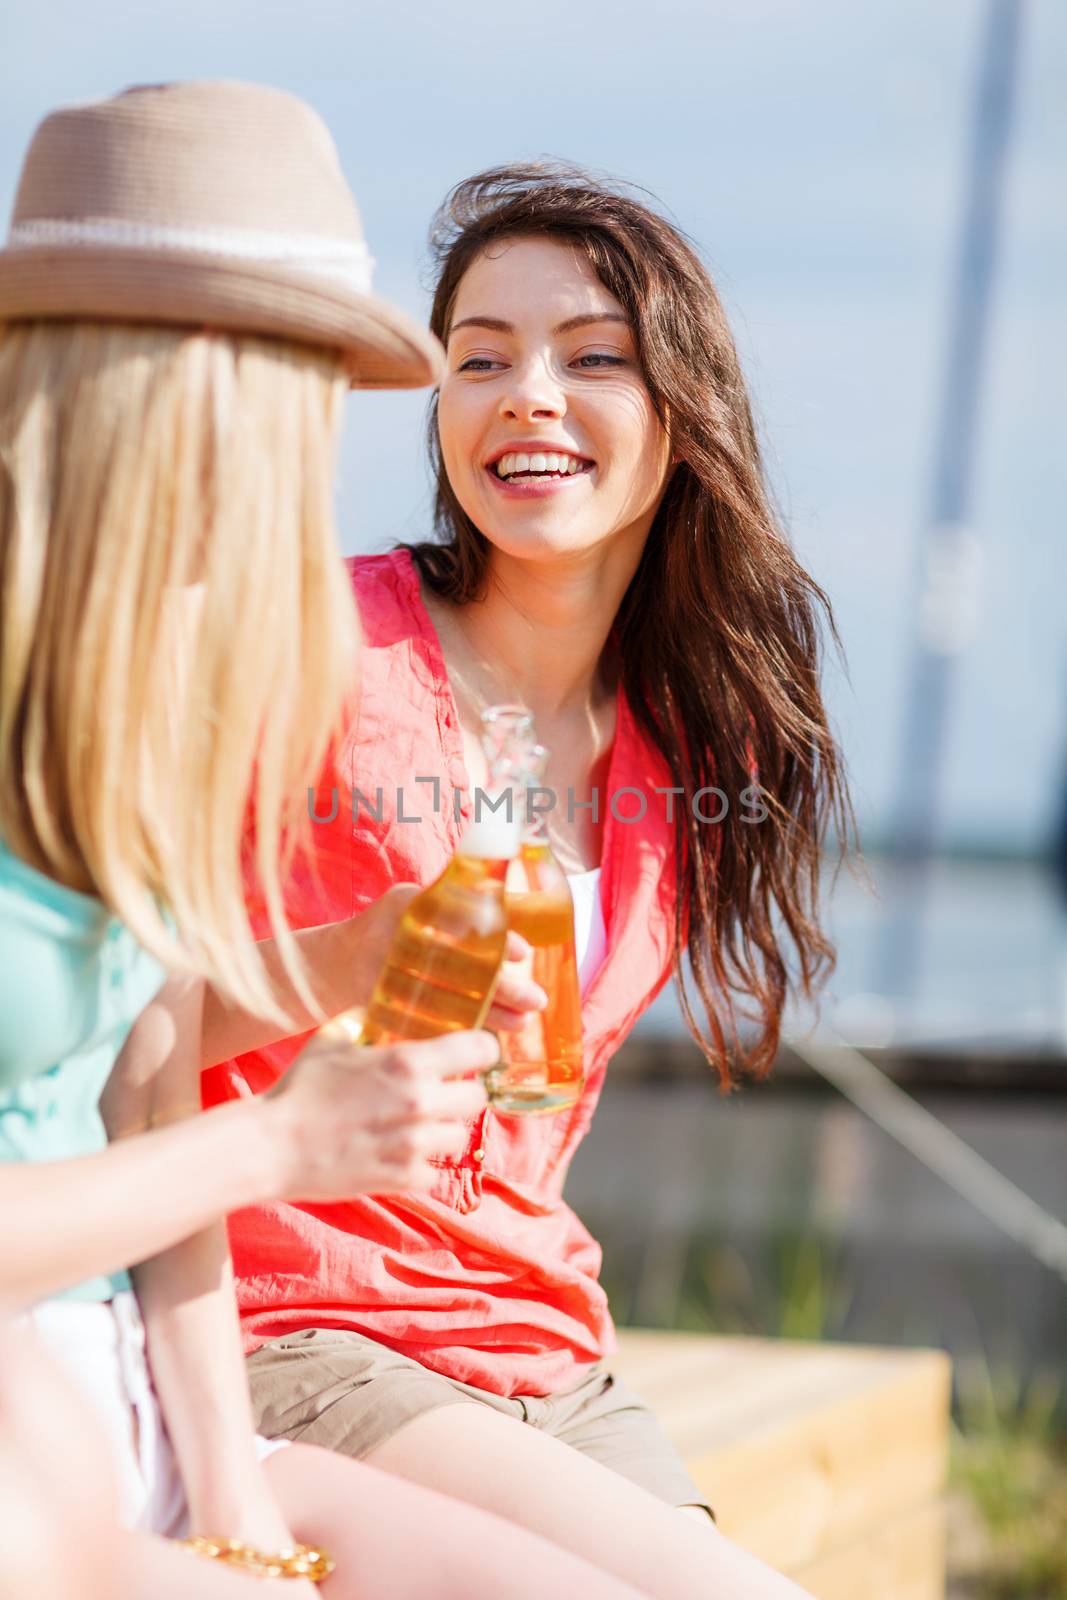 girls with drinks on the beach by dolgachov